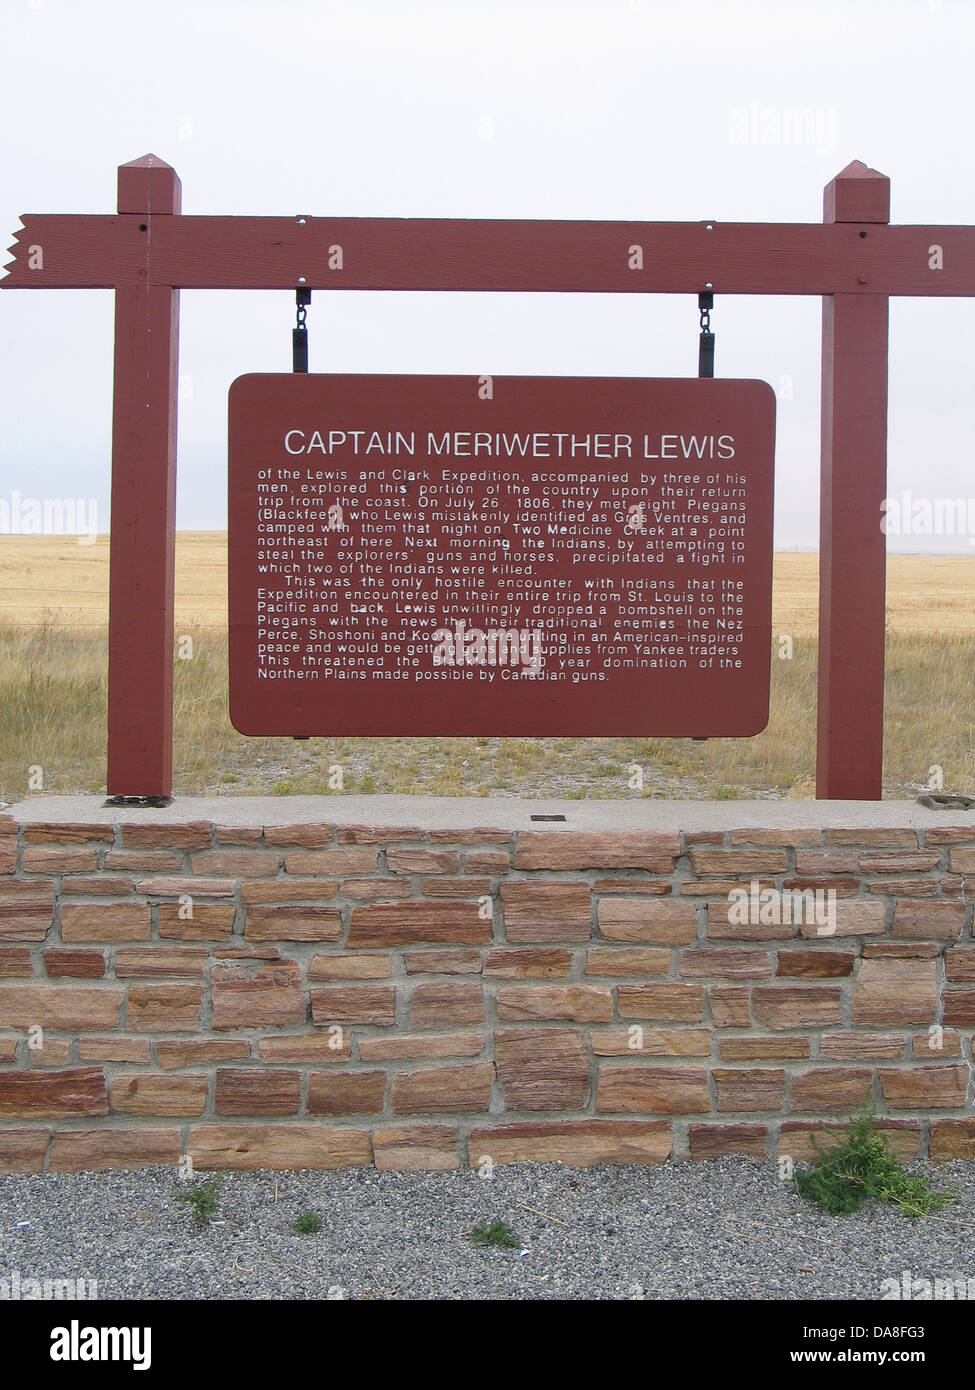 CAPTAIN MERIWETHER LEWIS of the Lewis and Clark Expedition, accompanied by three of his men, explored this portion of the country upon their return trip from the coast. On July 26, 1806, they met eight Piegans (Blackfeet), who Lewis mistakenly identified as Gros Ventres, and camped with them that night on Two Medicine Creek at a point northeast of here. Next morning the Indians, by attempting to steal the explorers' guns and horses, precipitated a fight in which two of the Indians were killed. Stock Photo